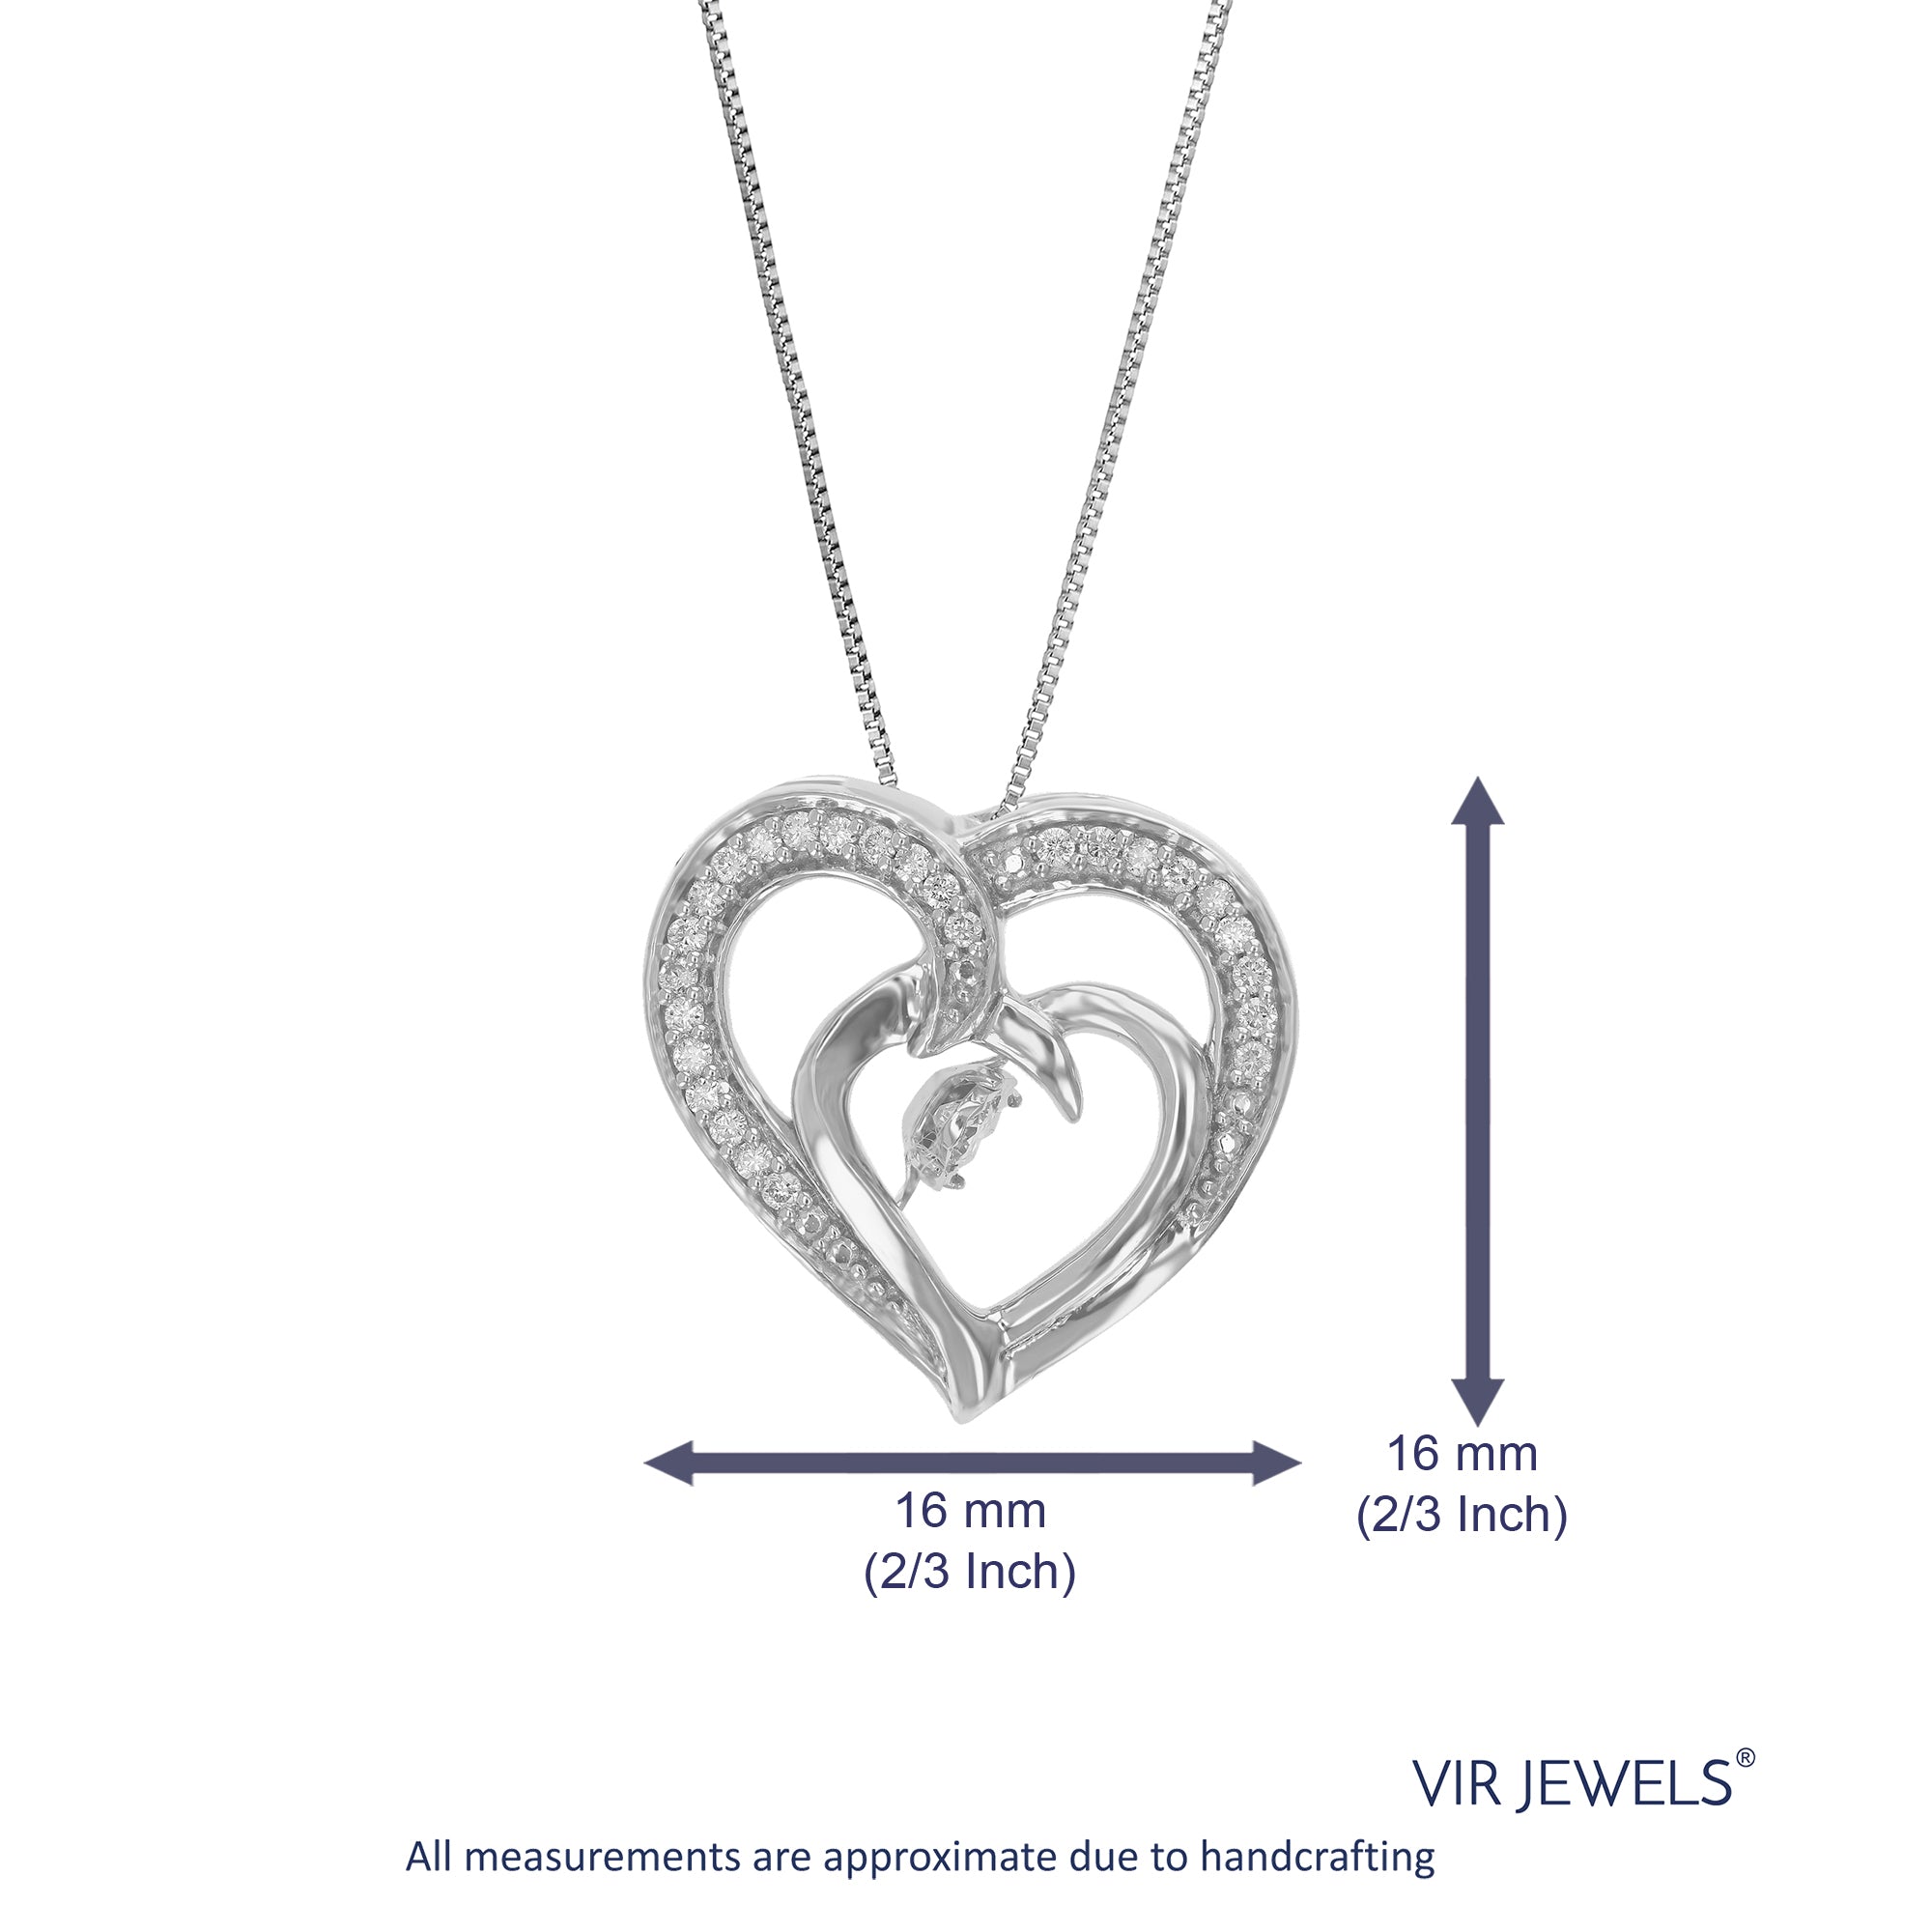 1/6 cttw Diamond Pendant Necklace for Women, Lab Grown Diamond Heart Pendant Necklace in .925 Sterling Silver with Chain, Size 2/3 Inch